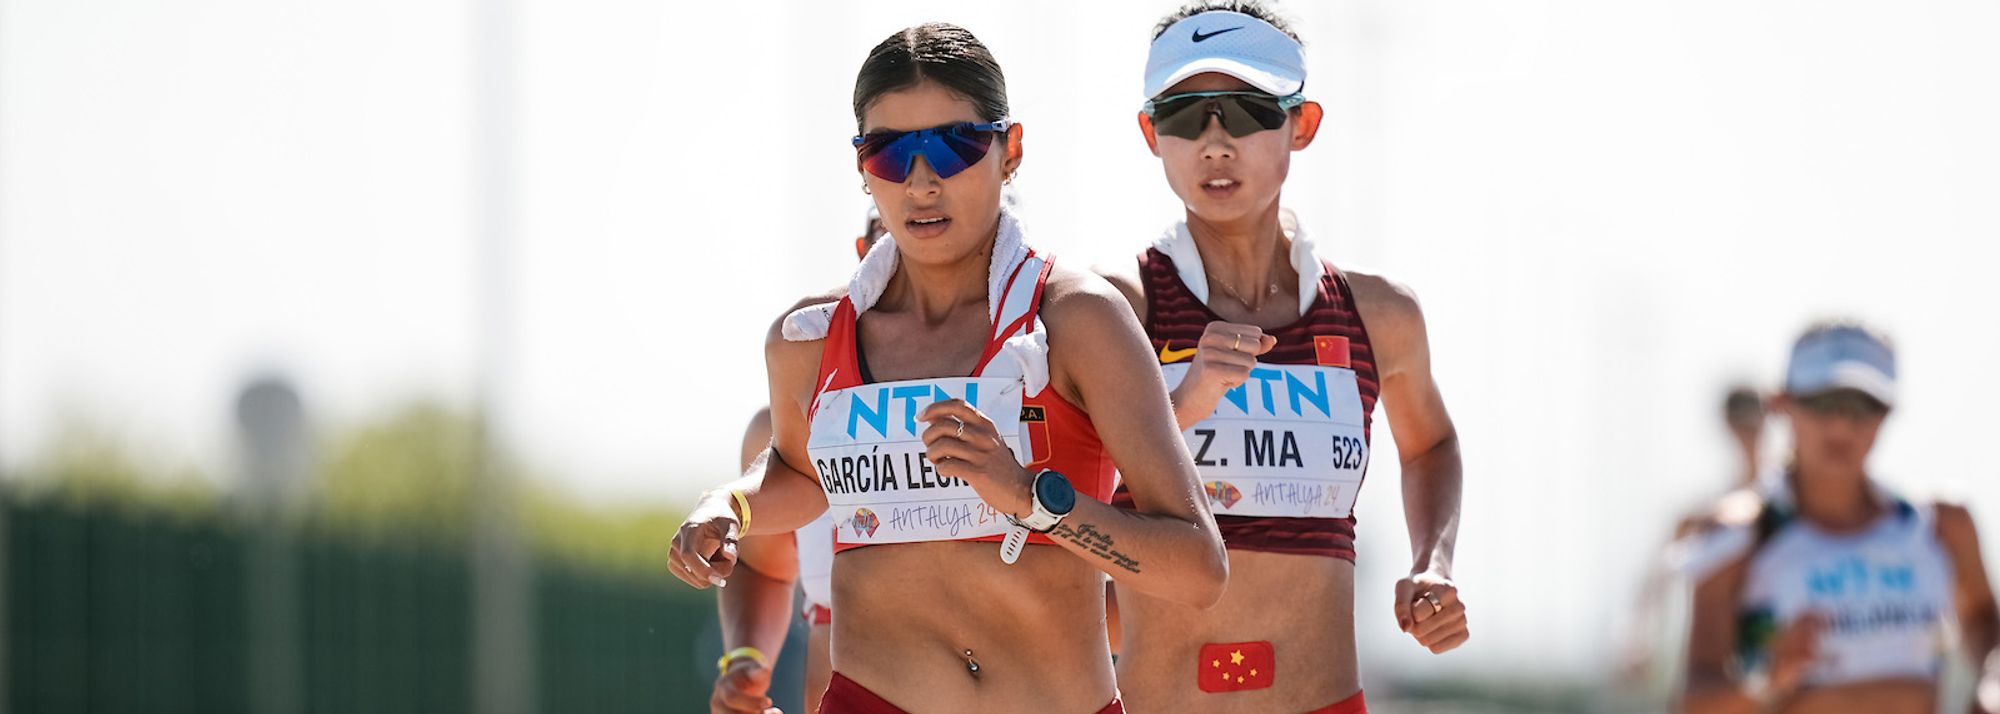 Kimberly Garcia strode imperiously to the 20km title at the World Athletics Race Walking Team Championships Antalya 24